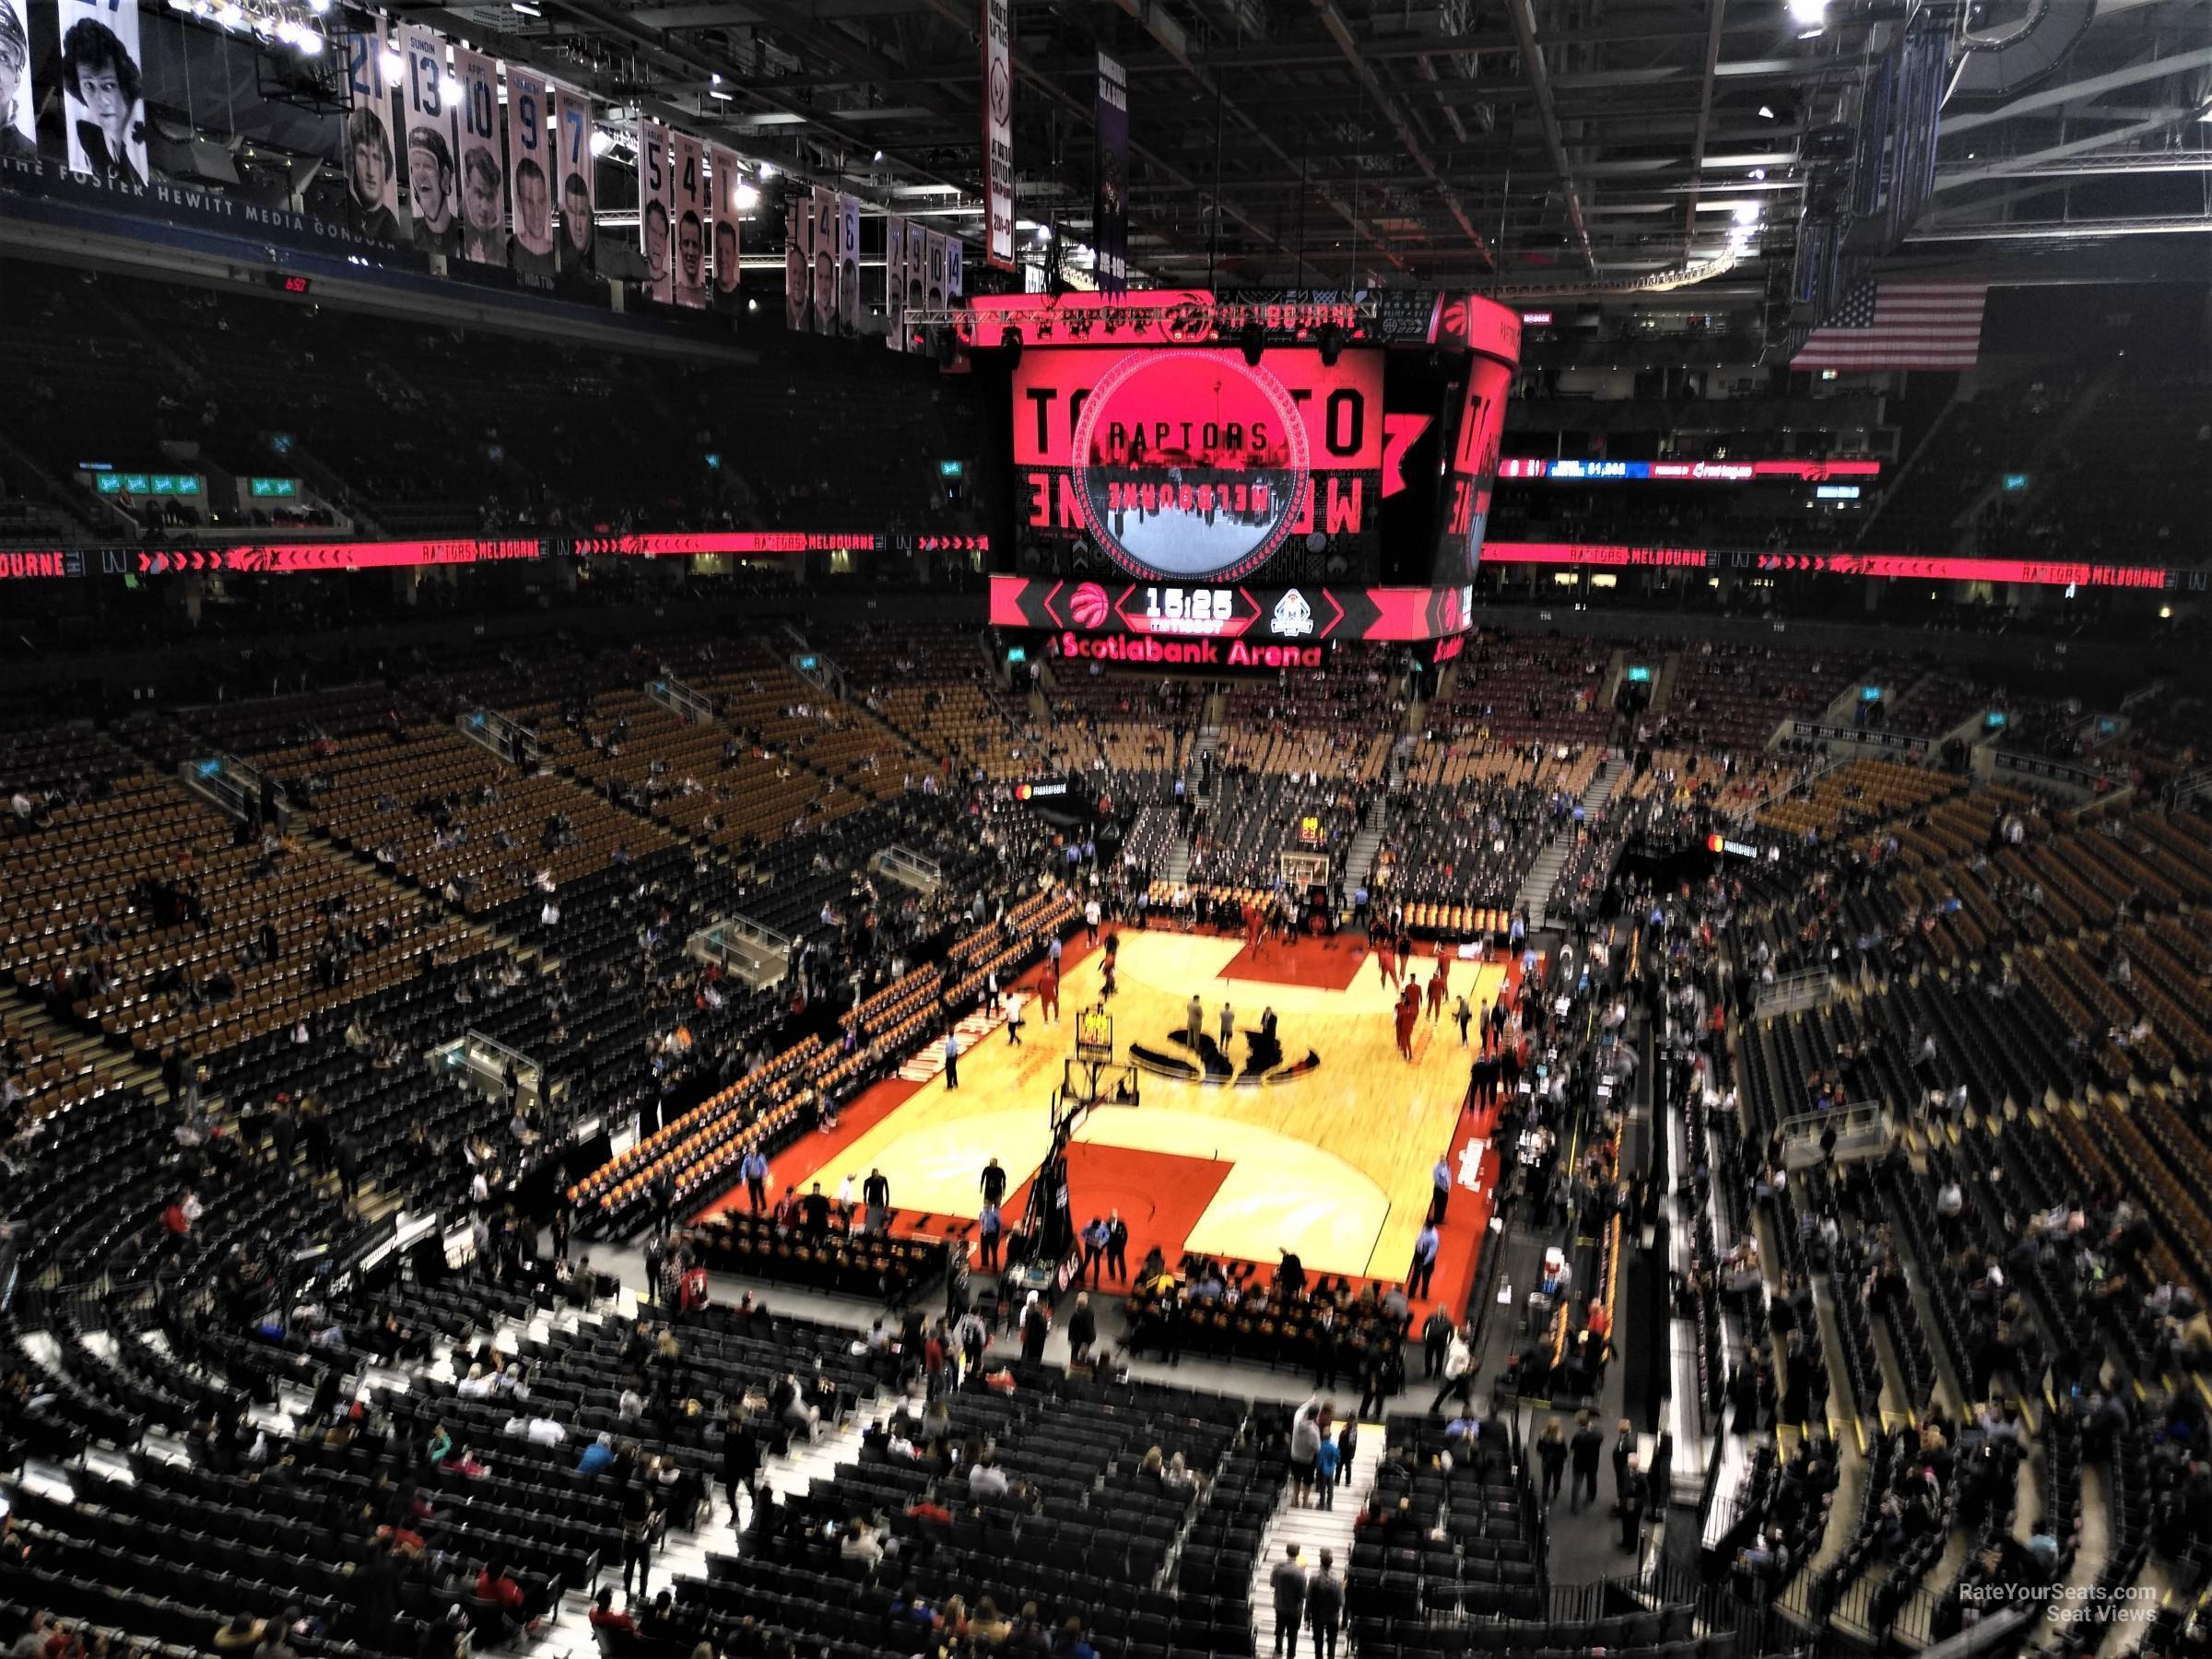 section 302, row 3 seat view  for basketball - scotiabank arena